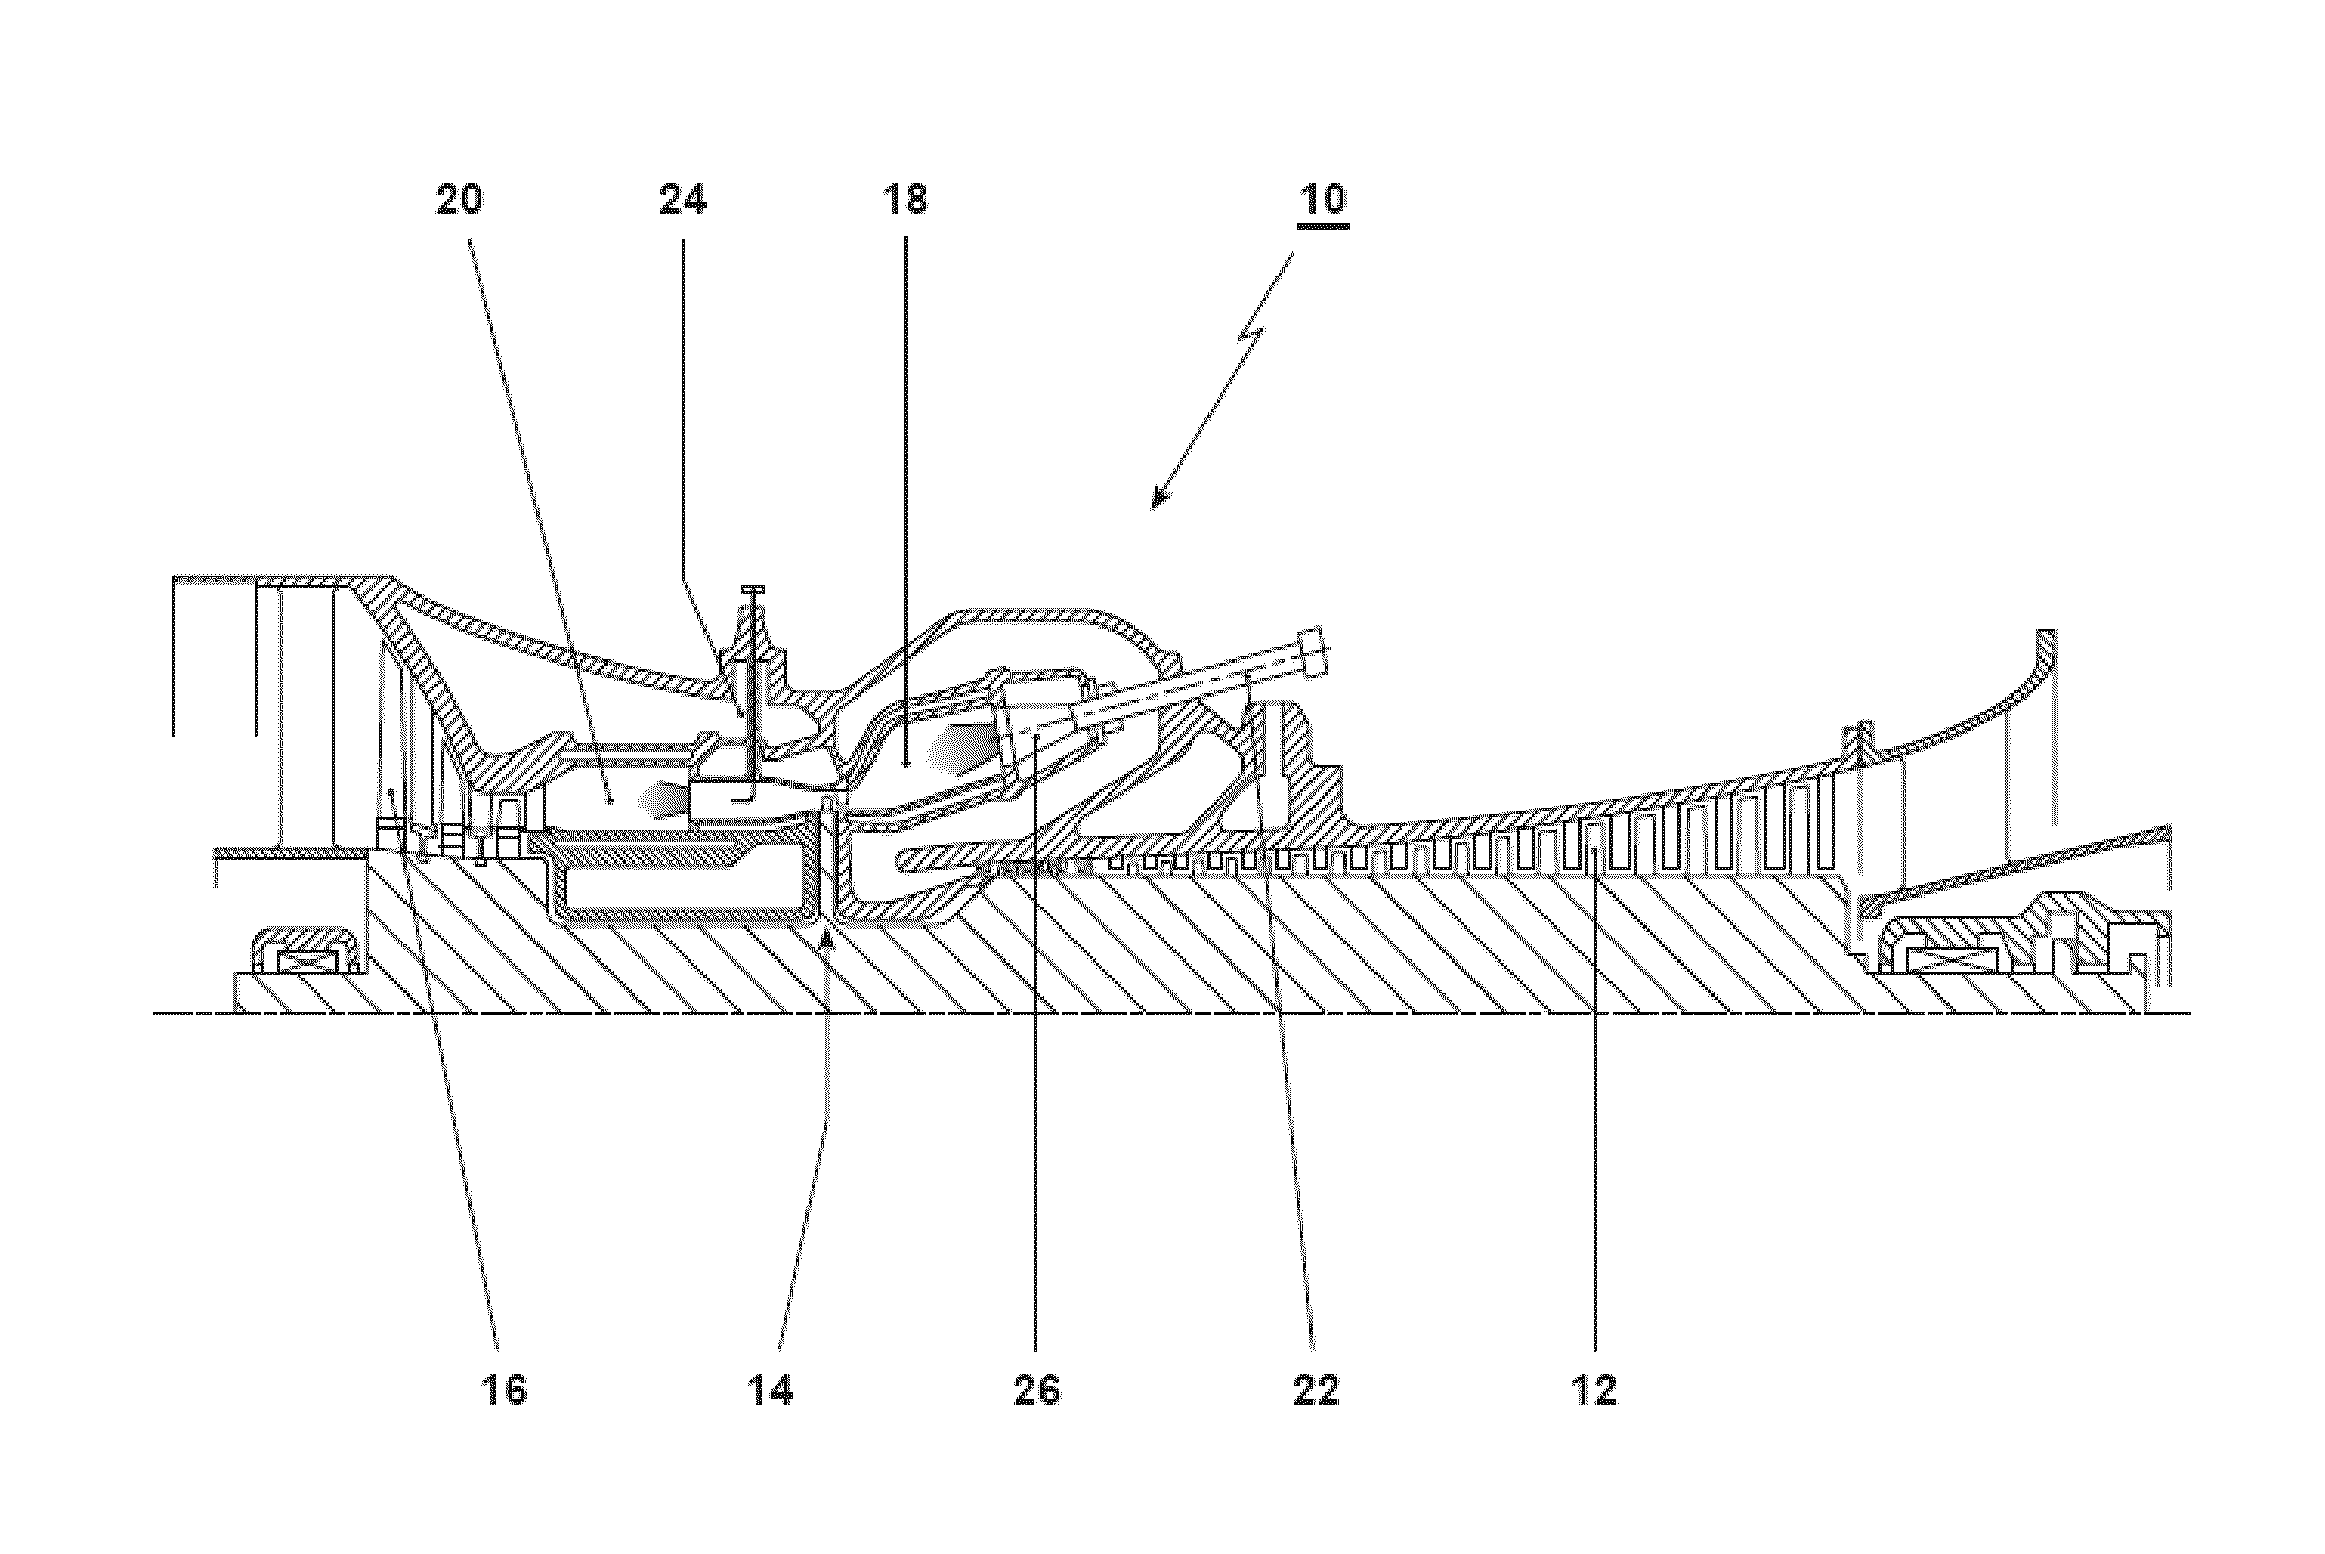 Operating method for hydrogen/natural gas blends within a reheat gas turbine